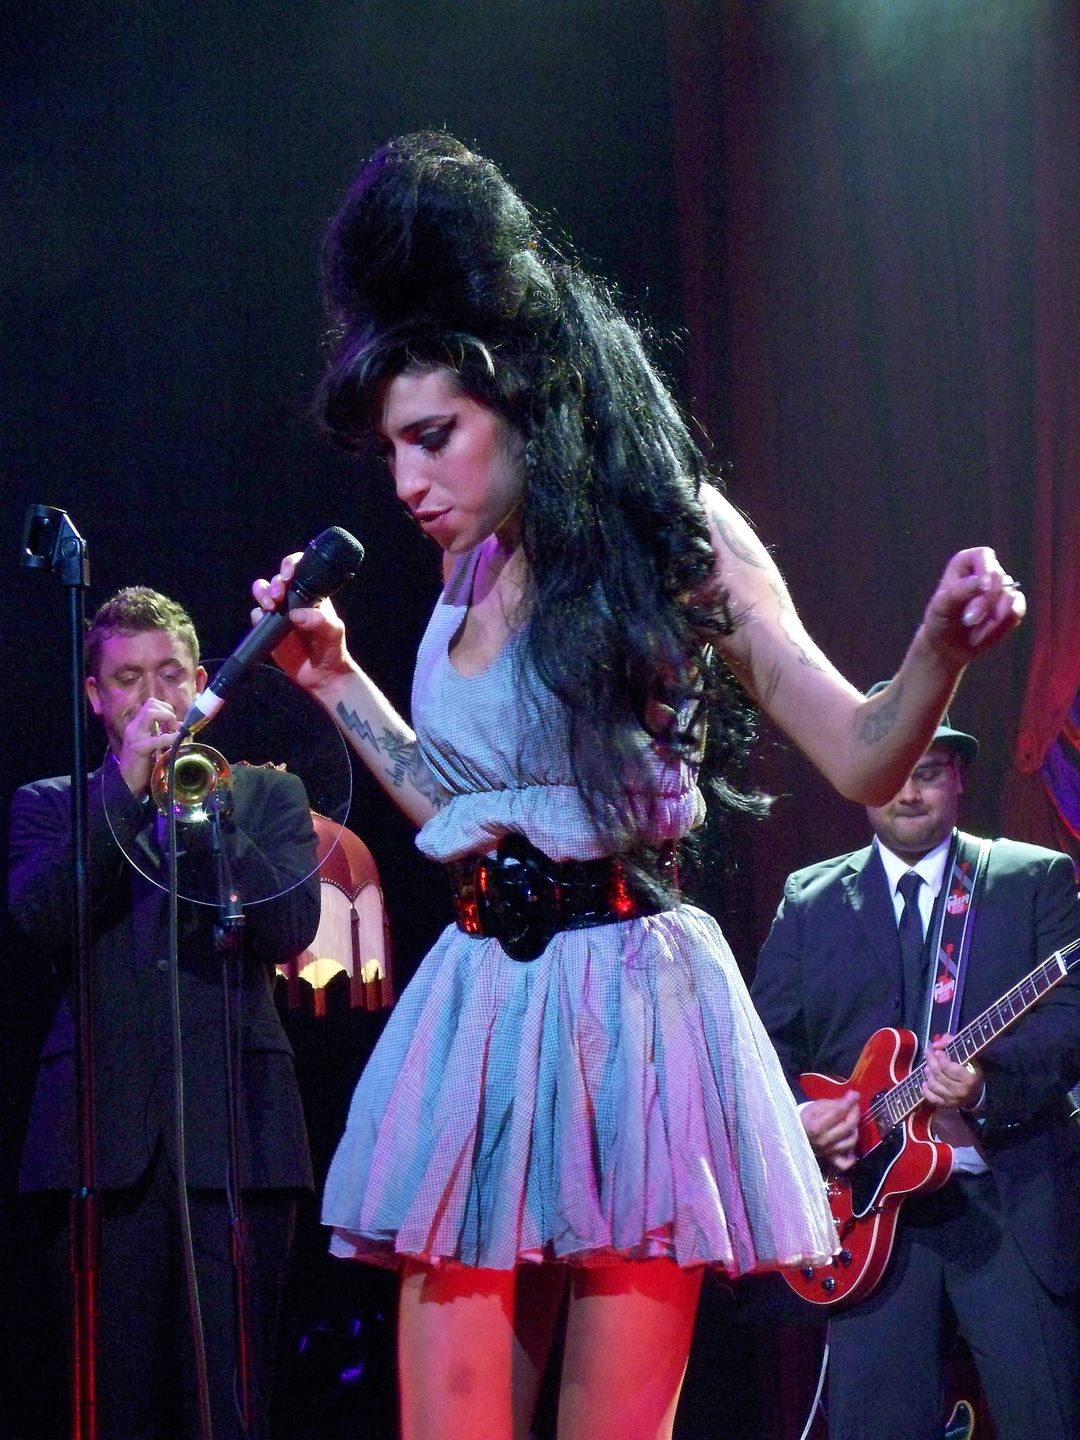 Amy Winehouse performing at Shepherd's Bush Empire in 2007 wearing a baby blue dress with a black belt